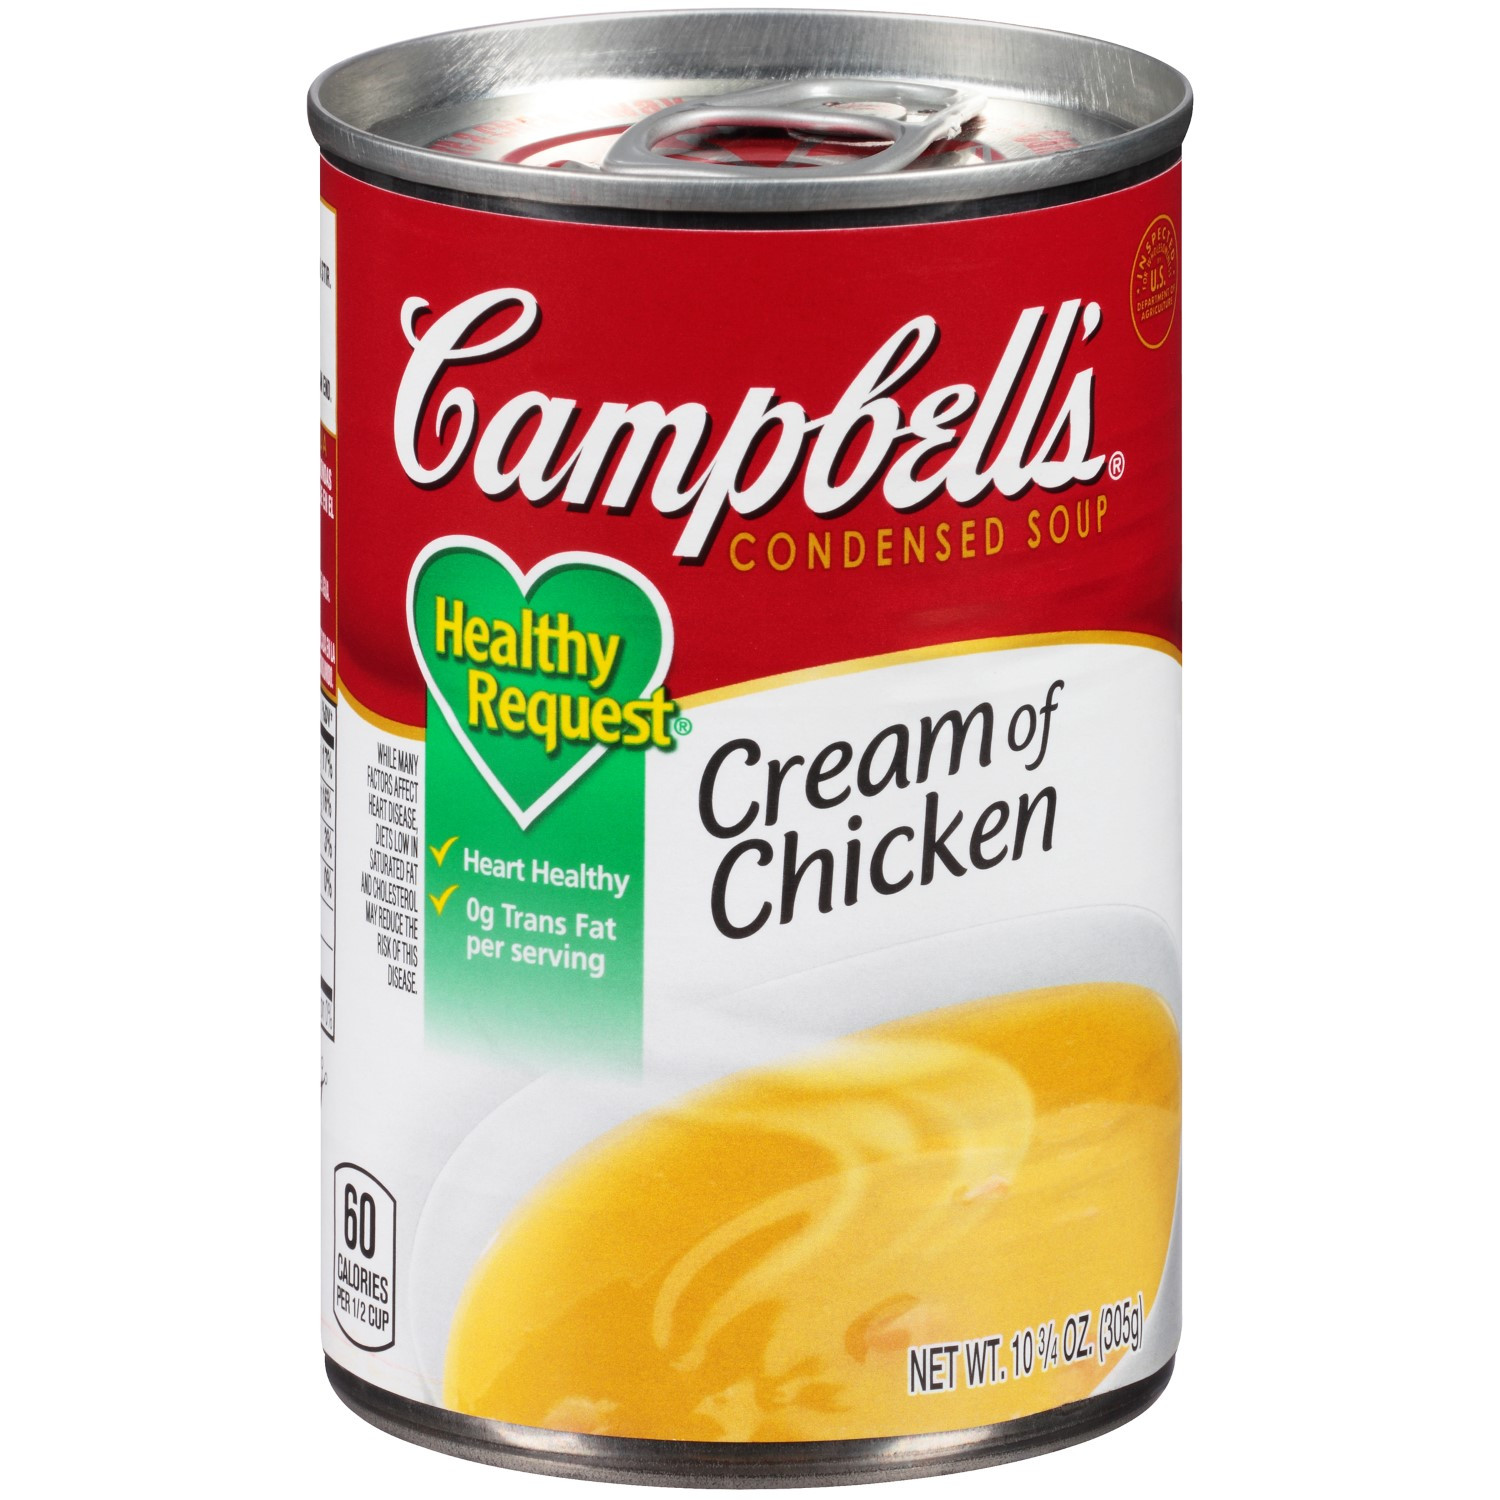 Healthy Cream Of Chicken Soup
 Campbell s Healthy Request Cream of Chicken Soup 10 75 Oz